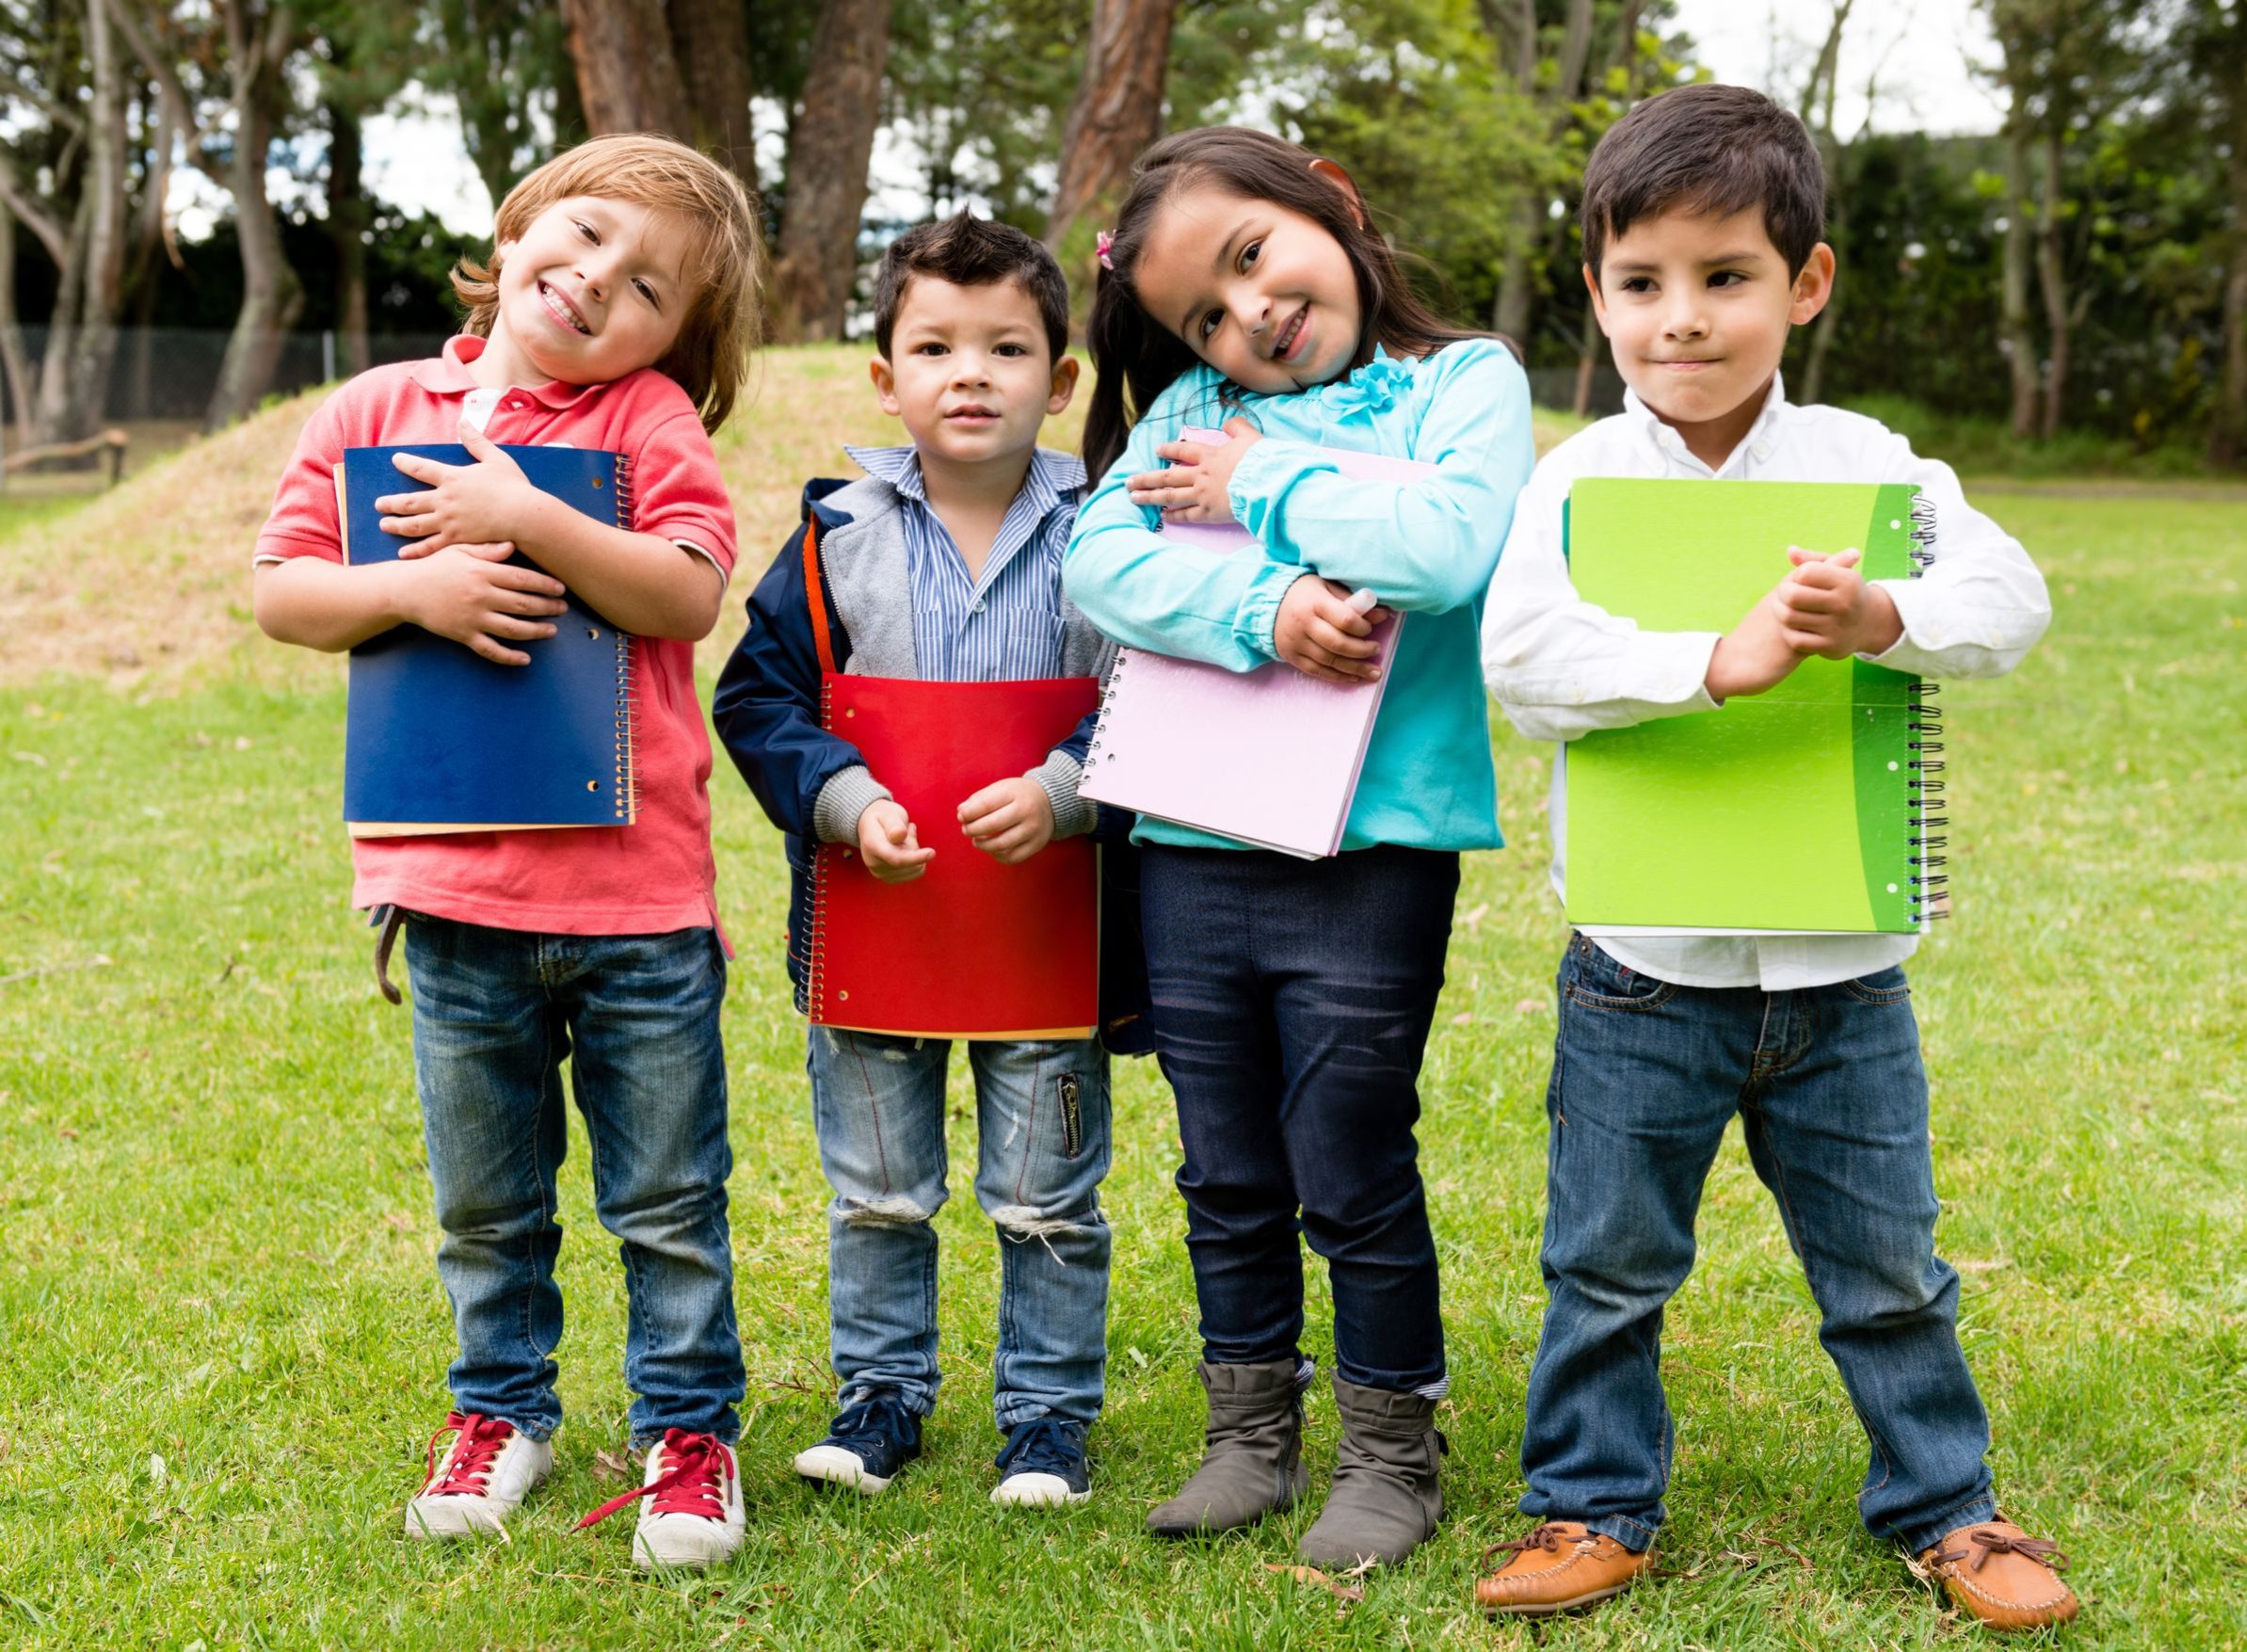 Four young children holding notebooks